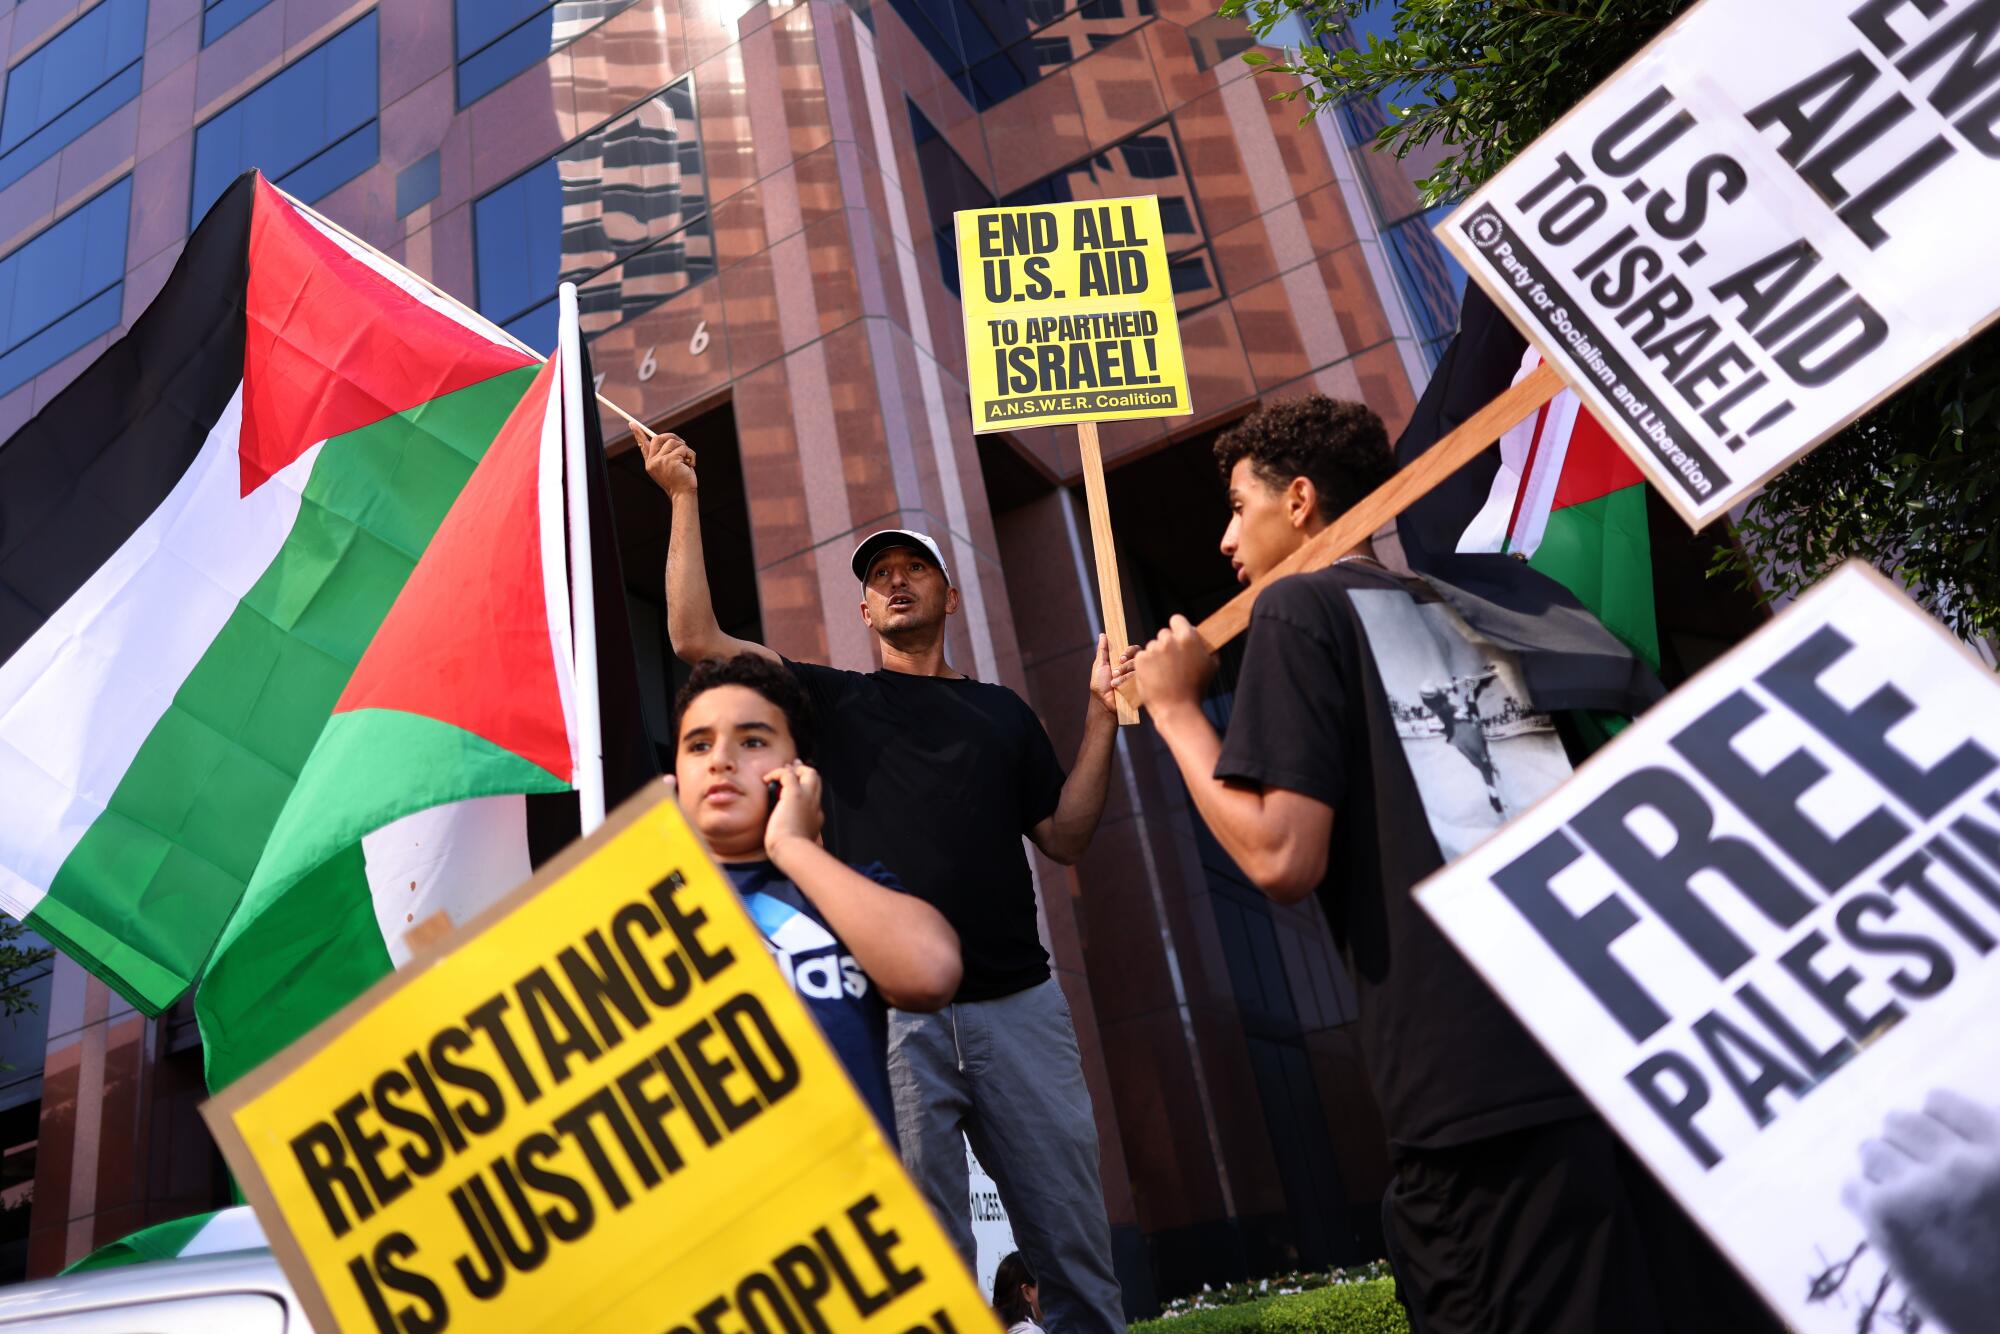 People holding signs and waving flags gather in Westwood in support of Palestinians caught in the Israel-Hamas war.